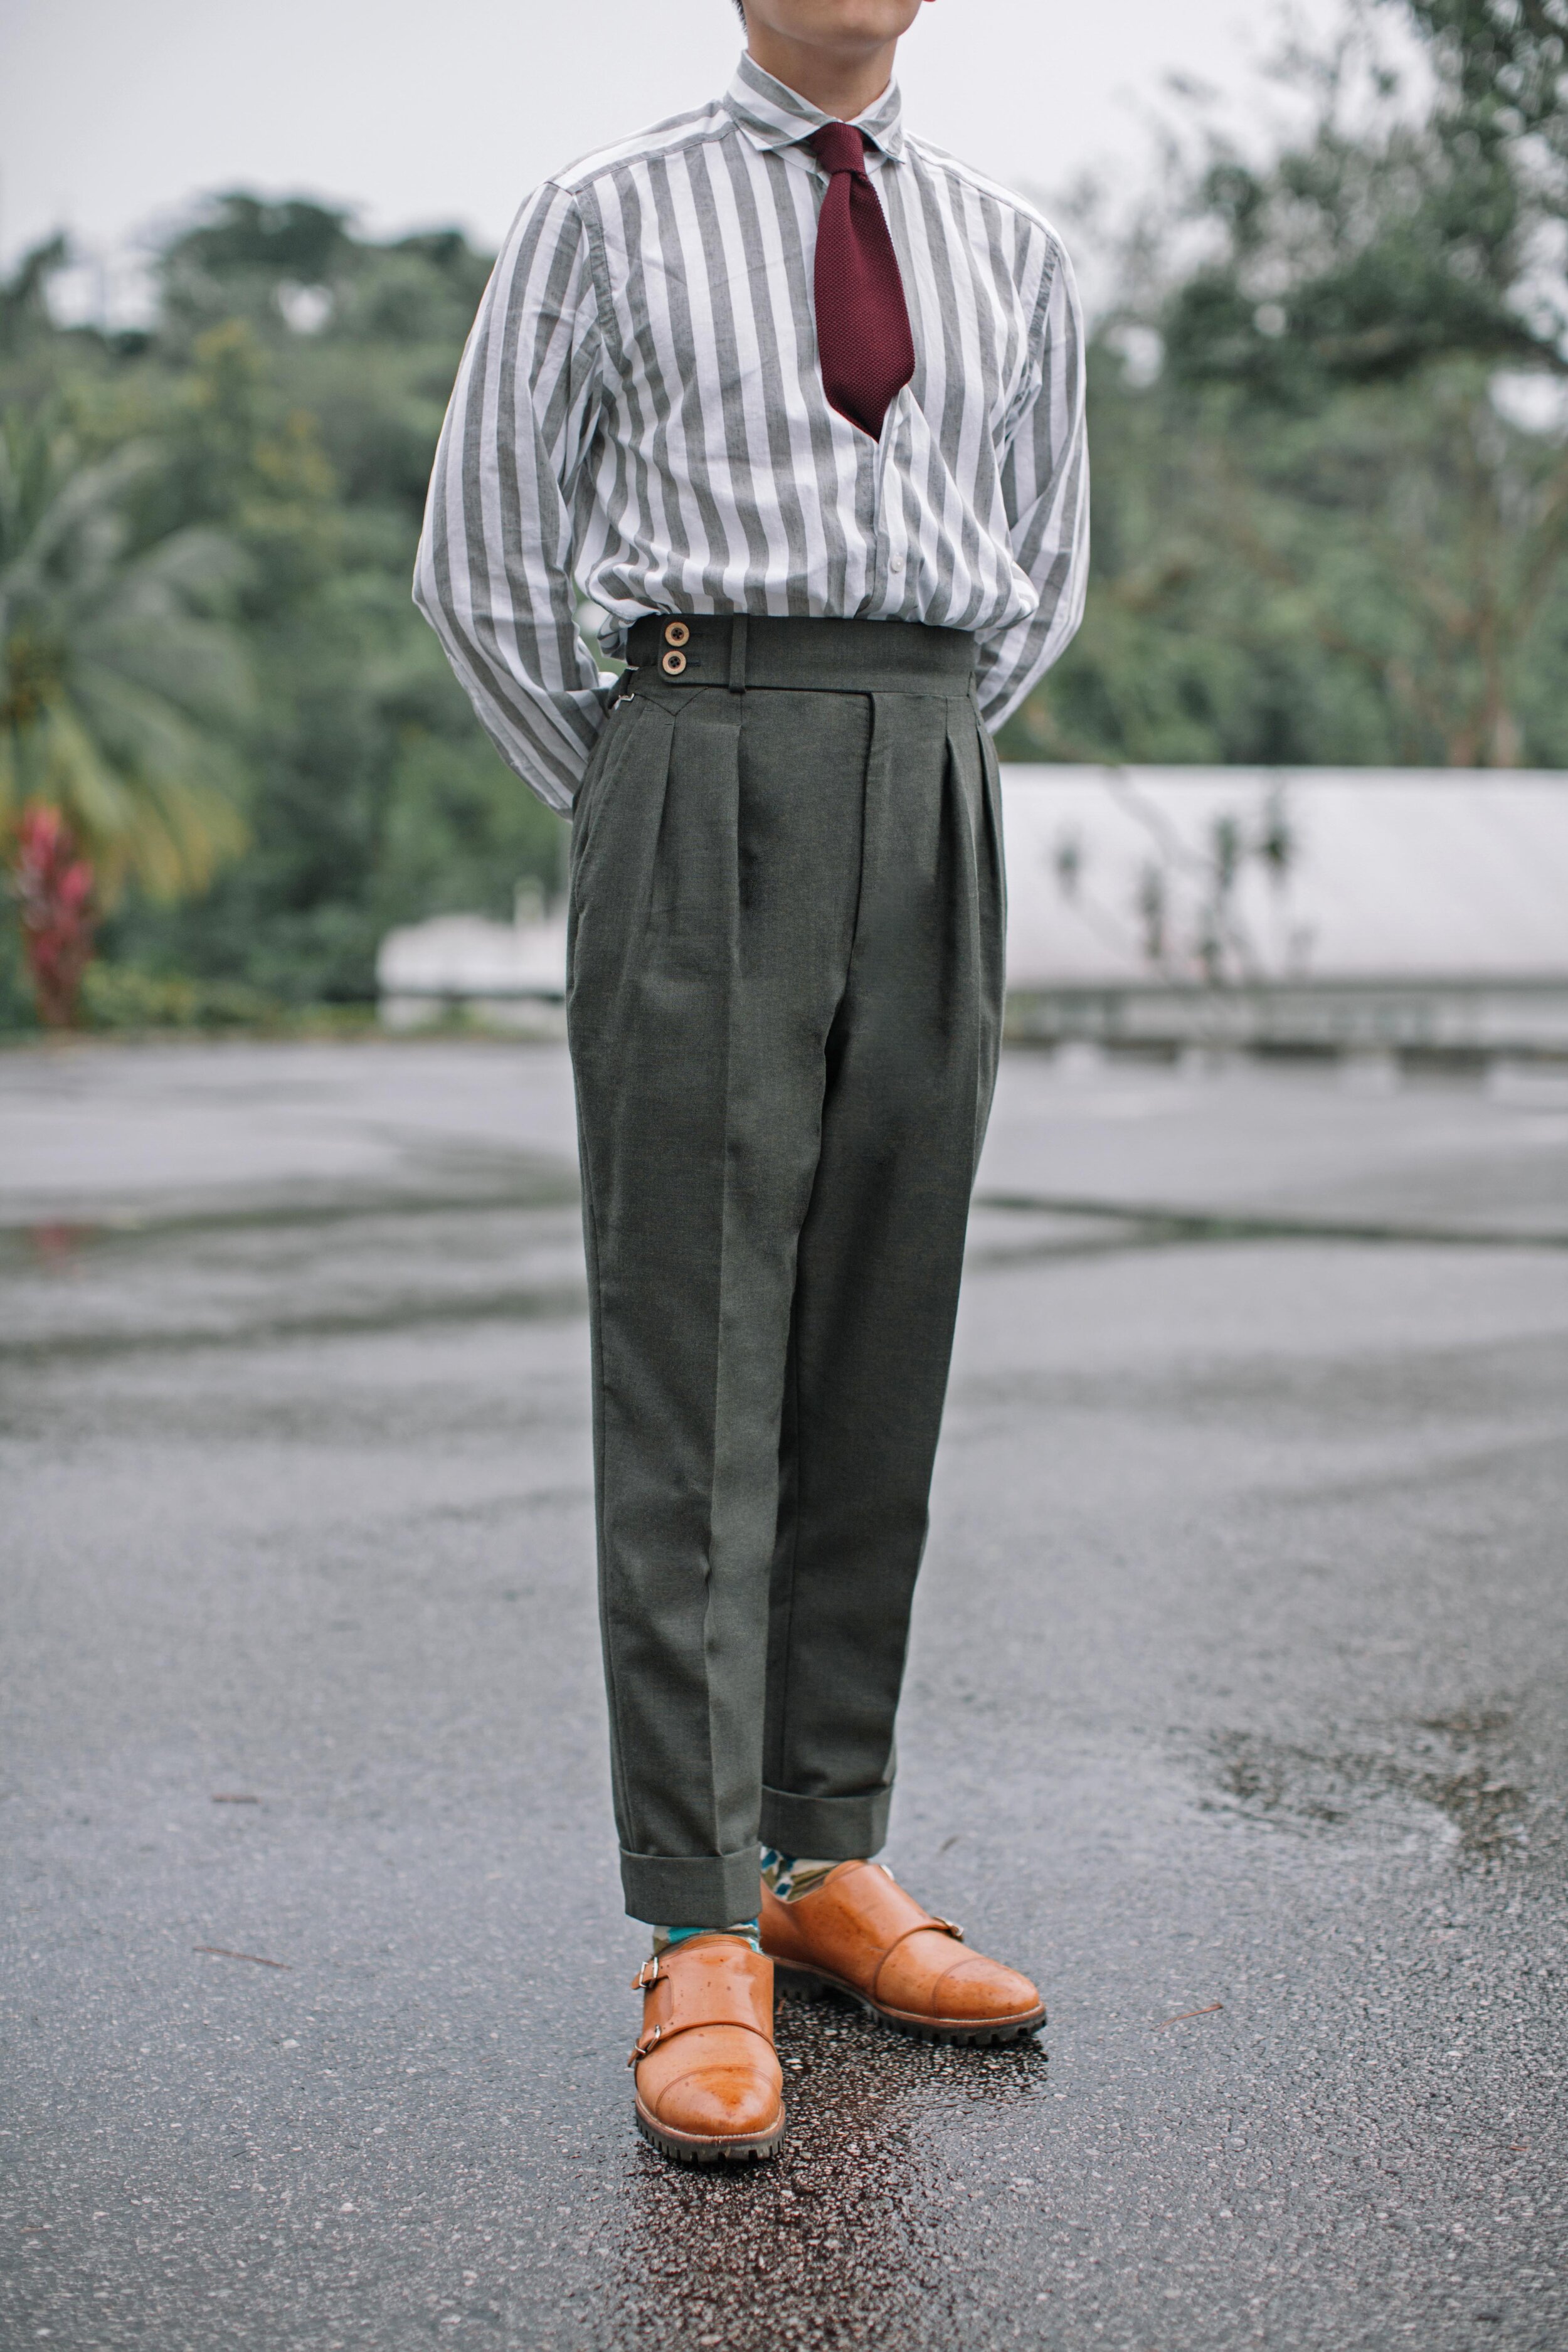 Made Suits® Singapore Tailor — High-Waisted Trousers Flatter Every Men -  Should you wear high waisted trousers?